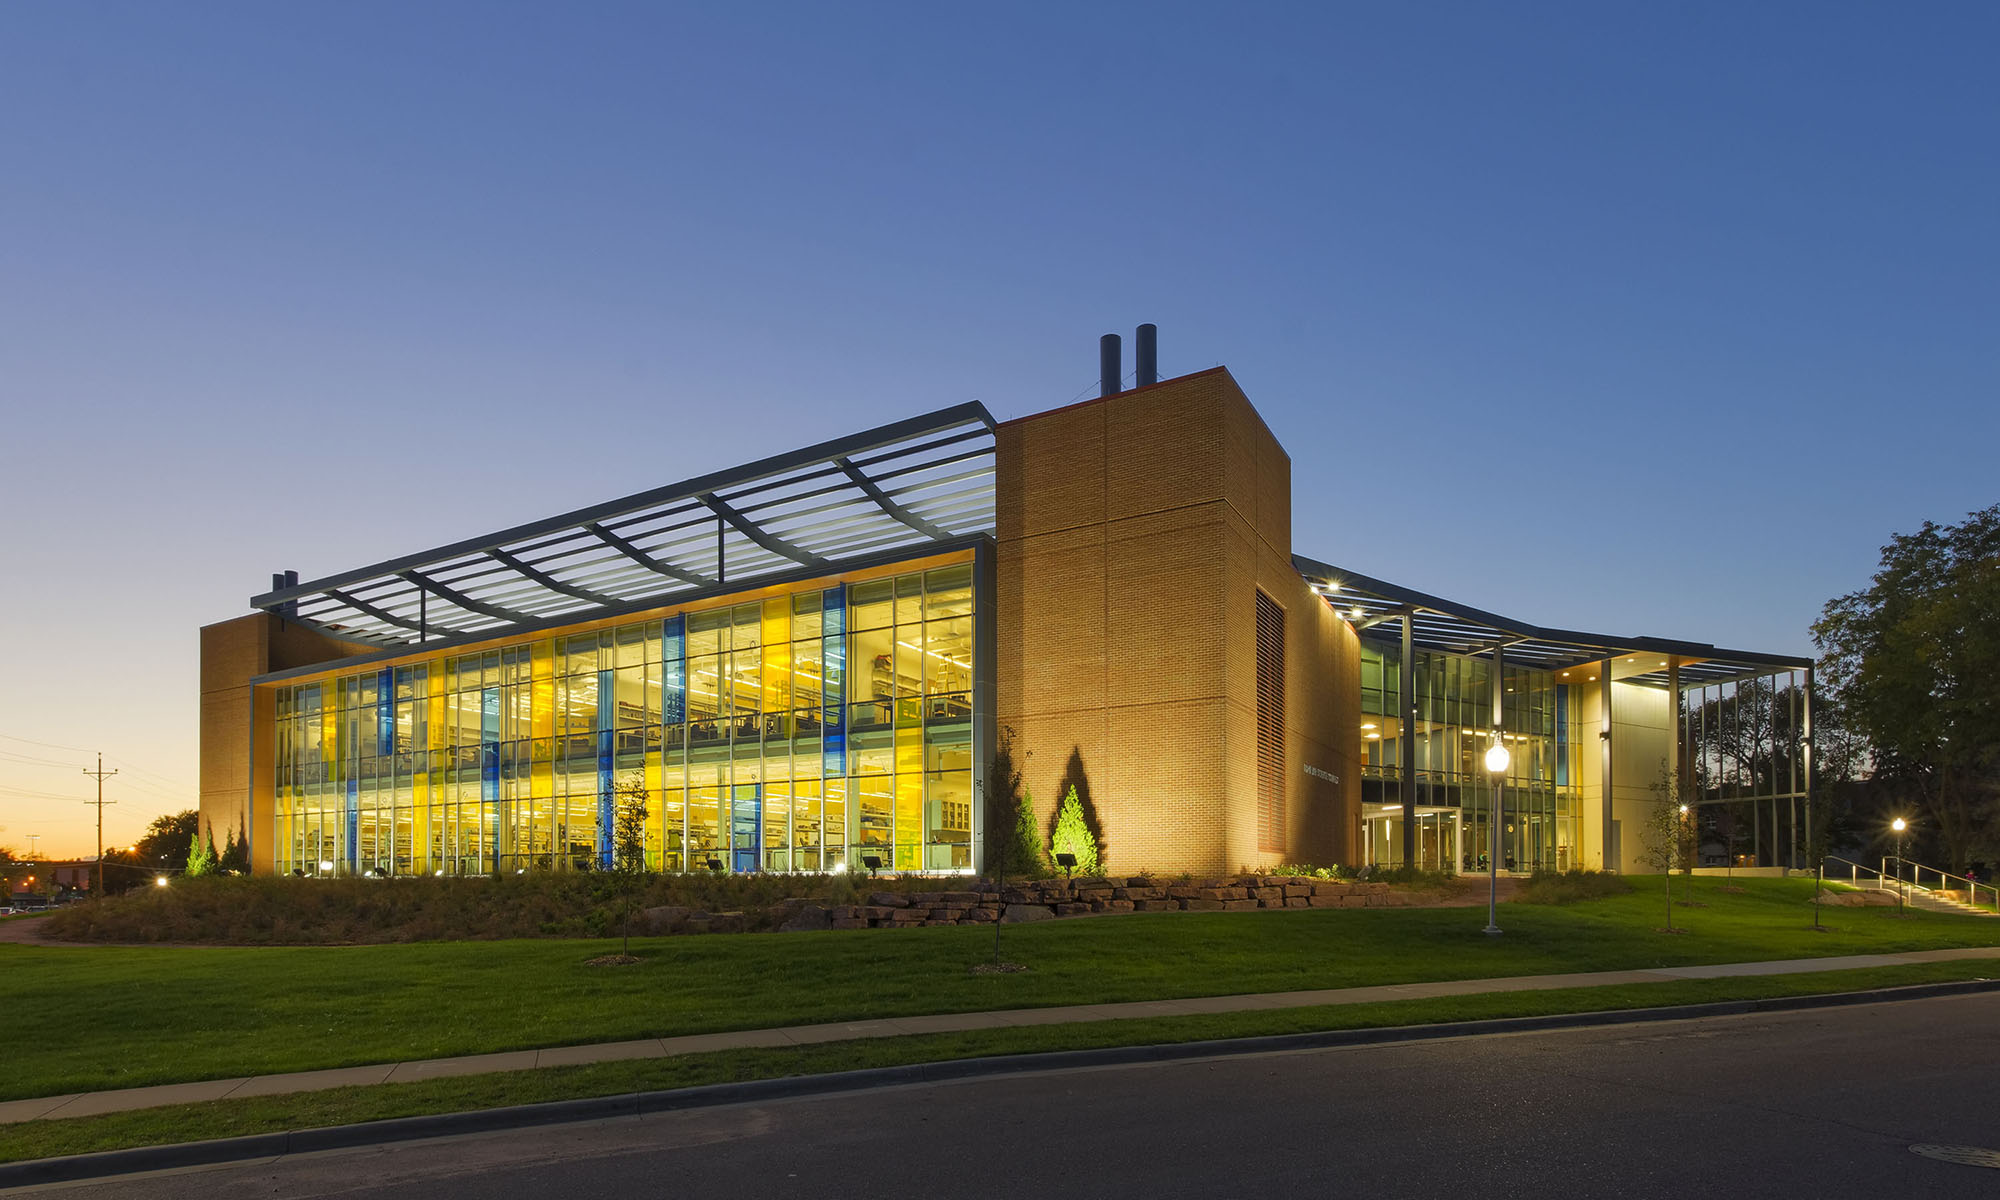 Augustana Froiland Science Complex, Sioux Falls, S.D., TSP Inc., photos by Liam Frederick (Architecture category entry)